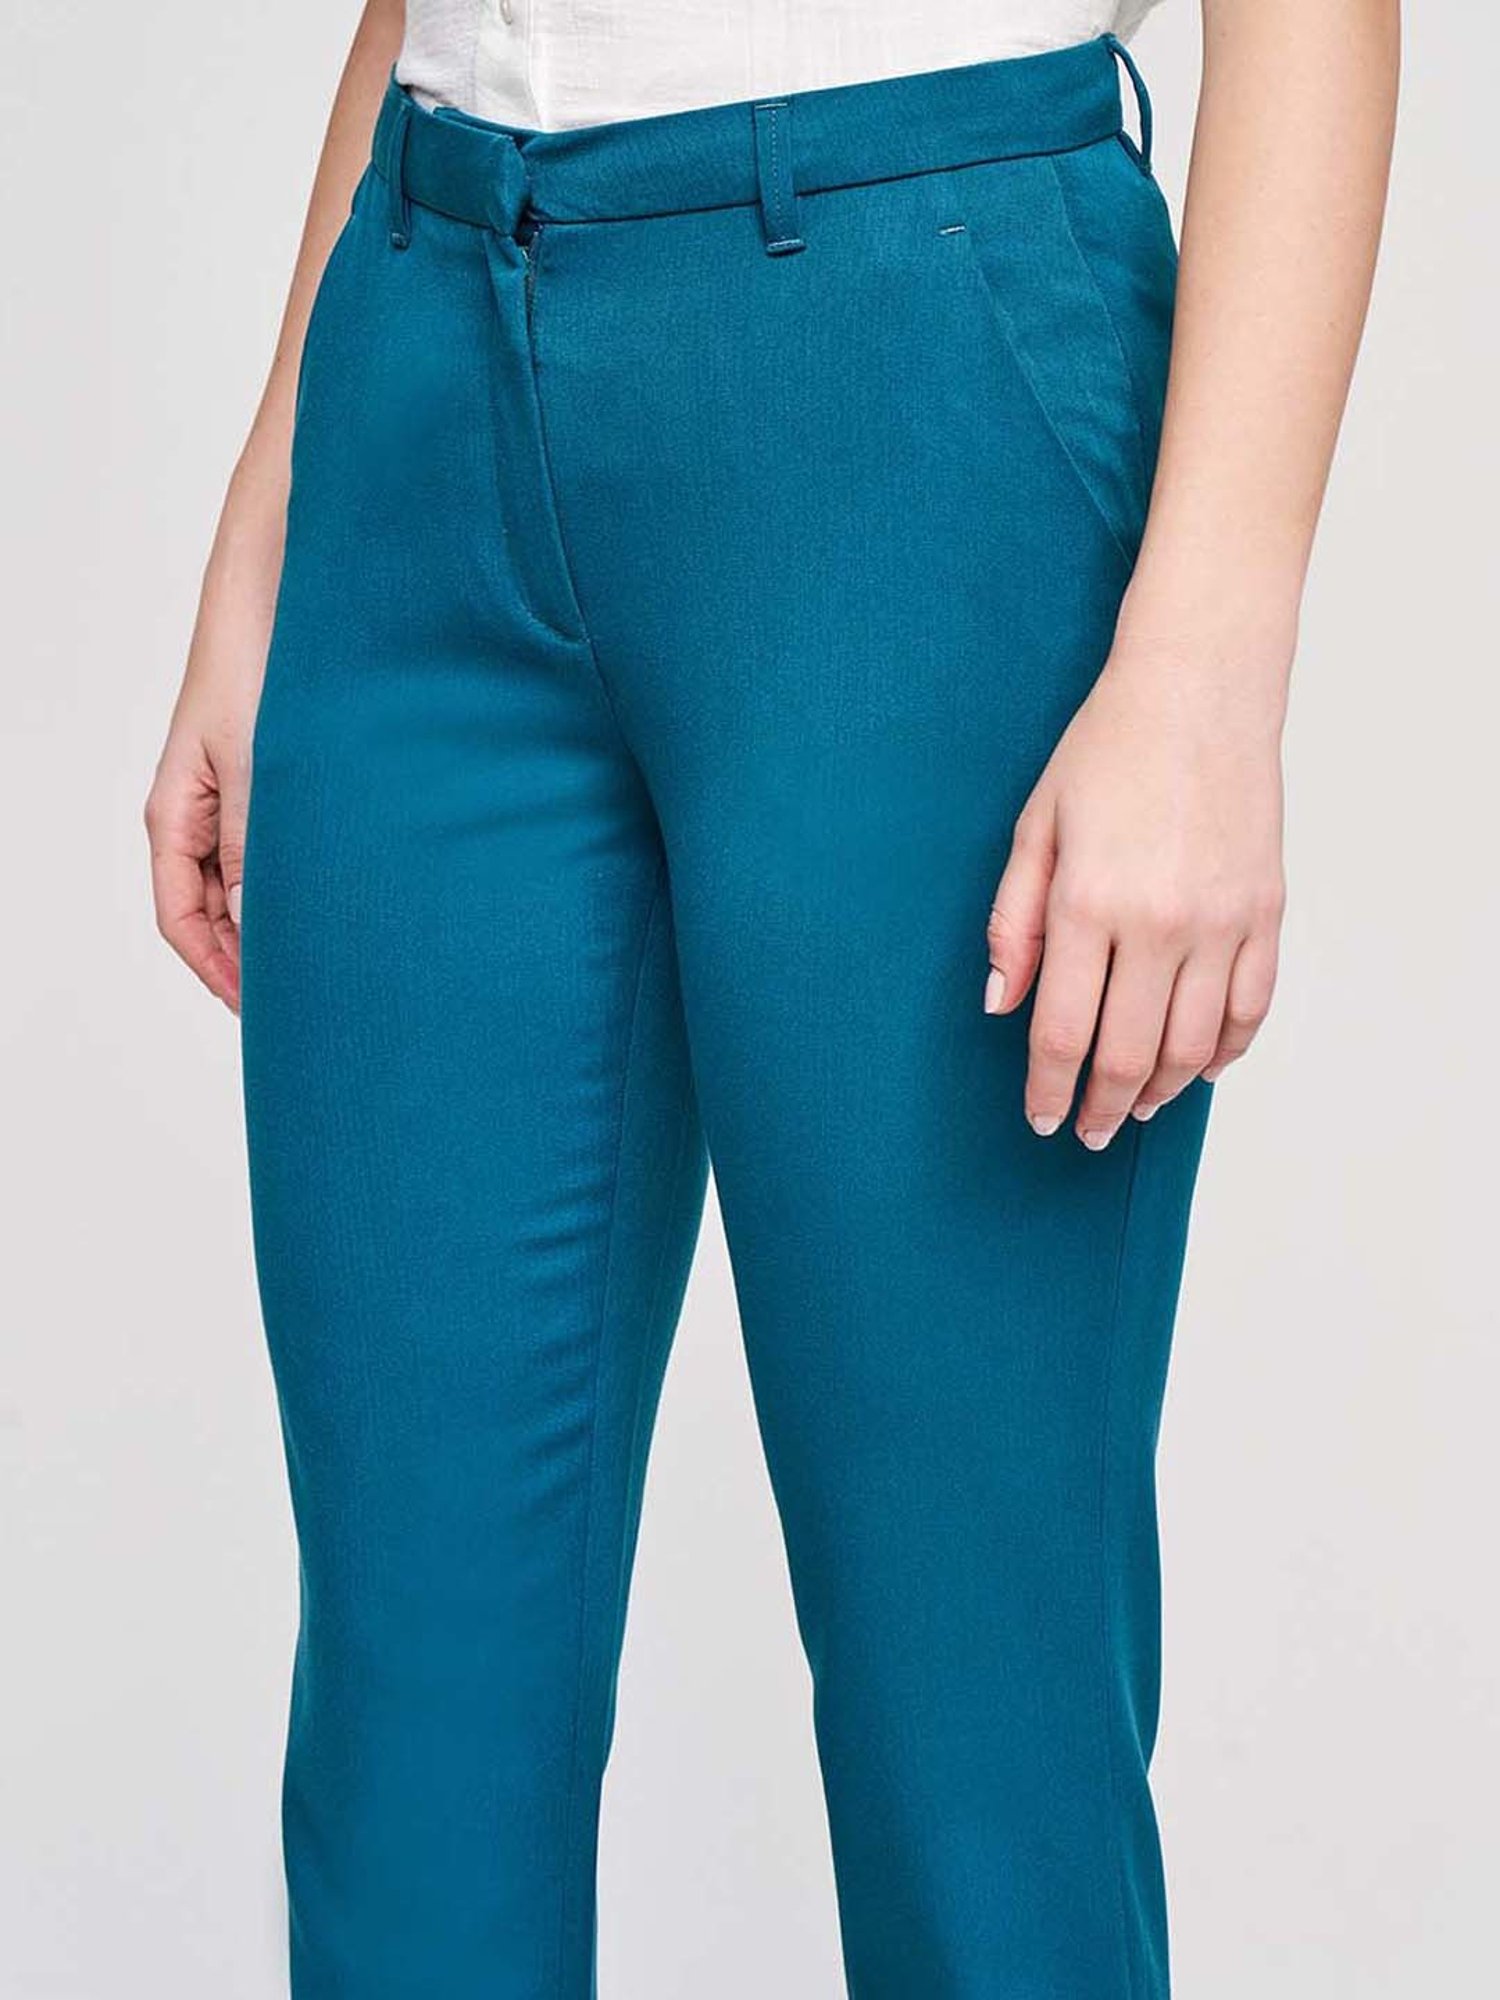 Buy Teal Blue Popcorn Textured Straight Fit Pant - Tistabene